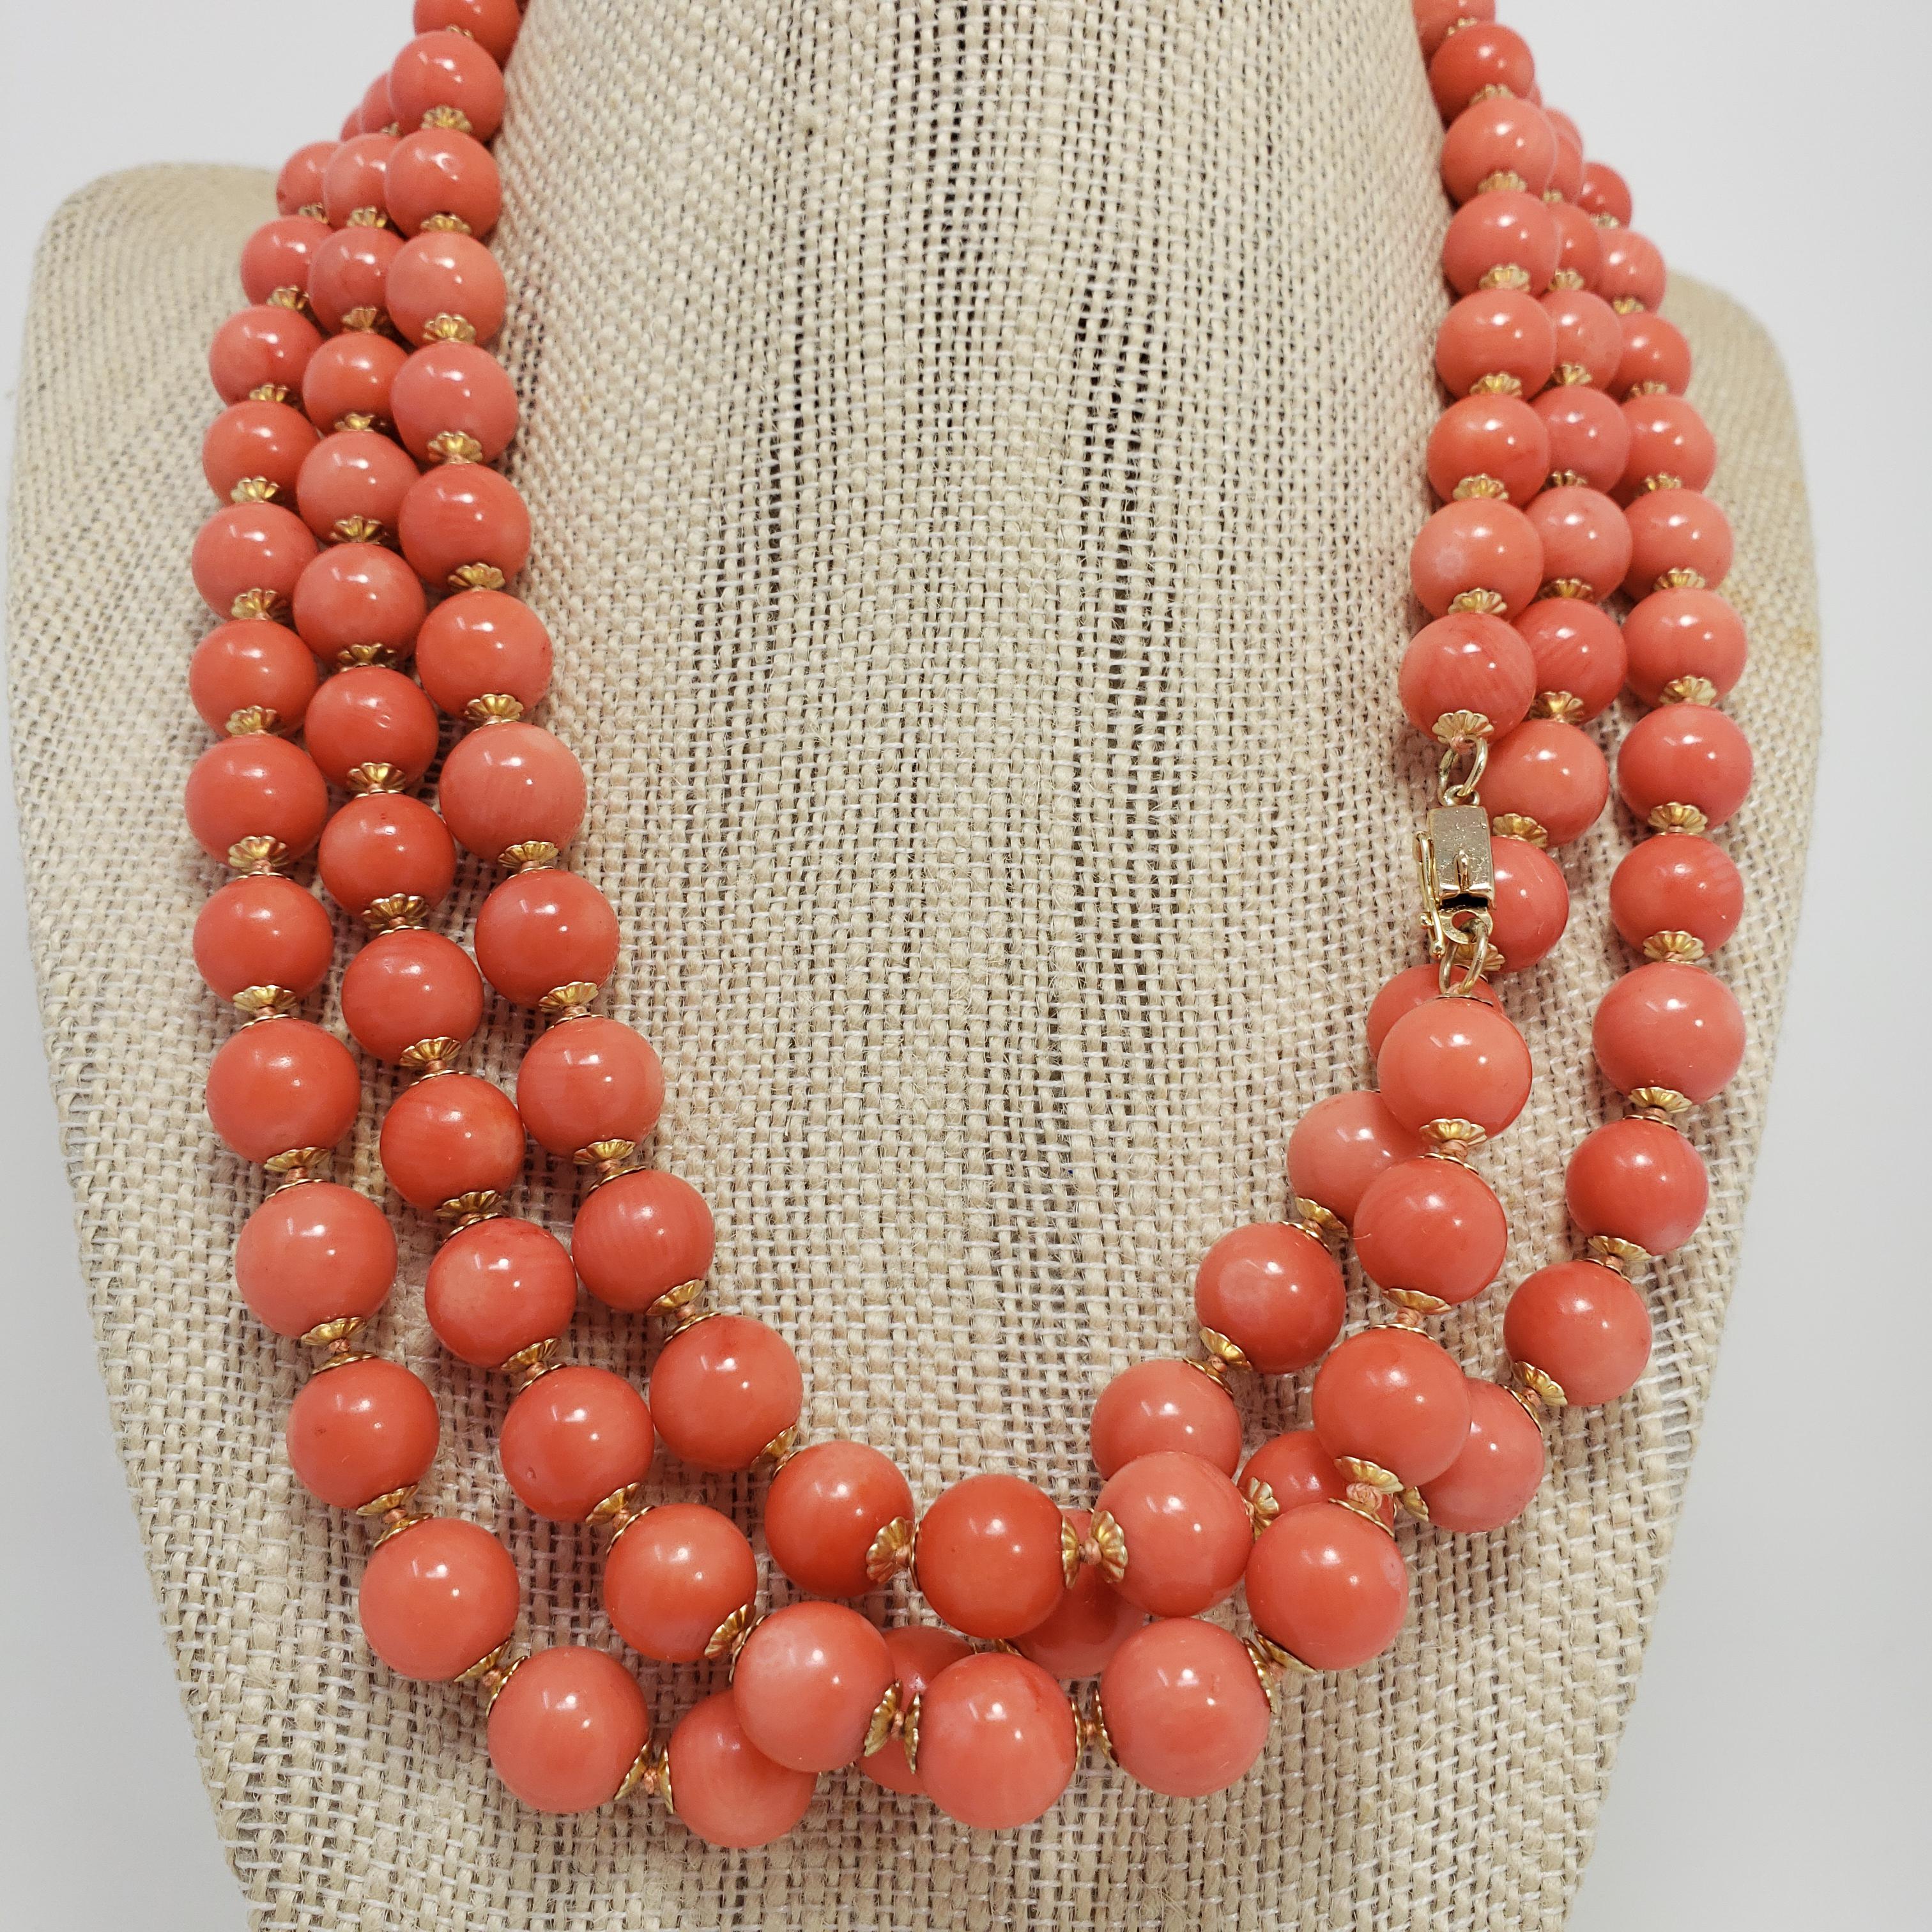 An extravagant and stylish necklace. Features 10mm salmon coral beads decorated with 14K yellow gold accents and fastened with a 14K yellow gold clasp. The impressive 145cm length make this a versatile accessory, which can be worn single or double